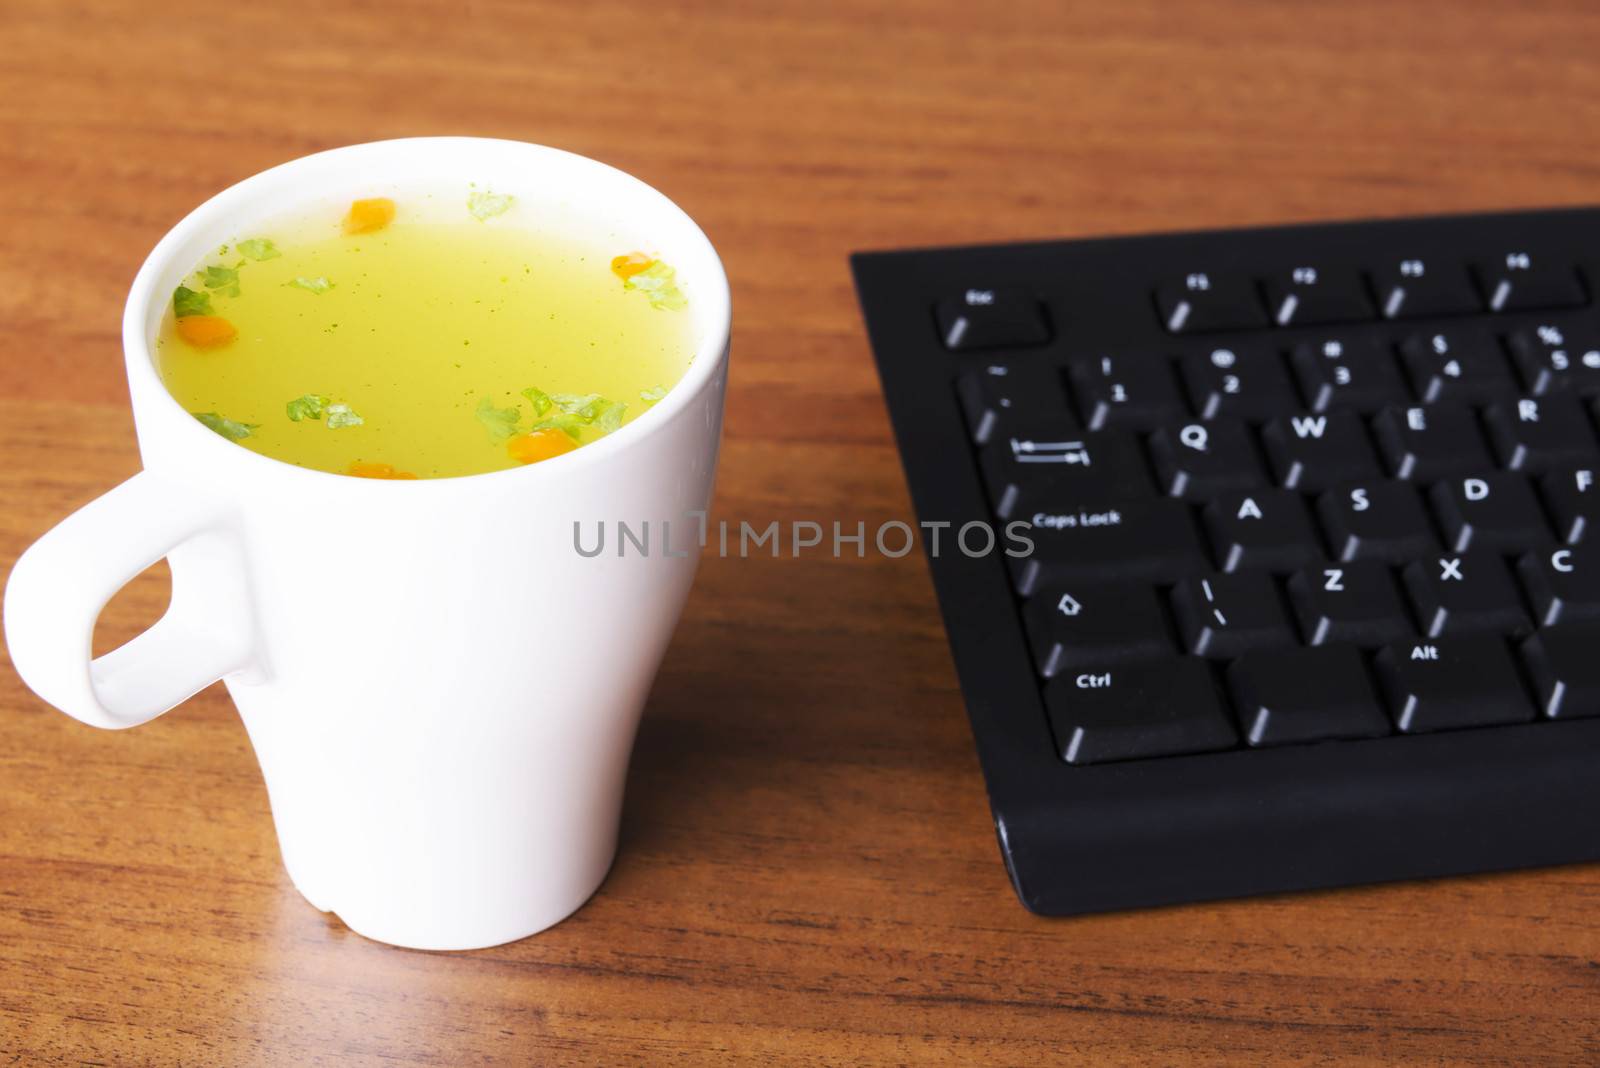 Hot vegetable soup in a white cup next to keyboard standing on wooden table.